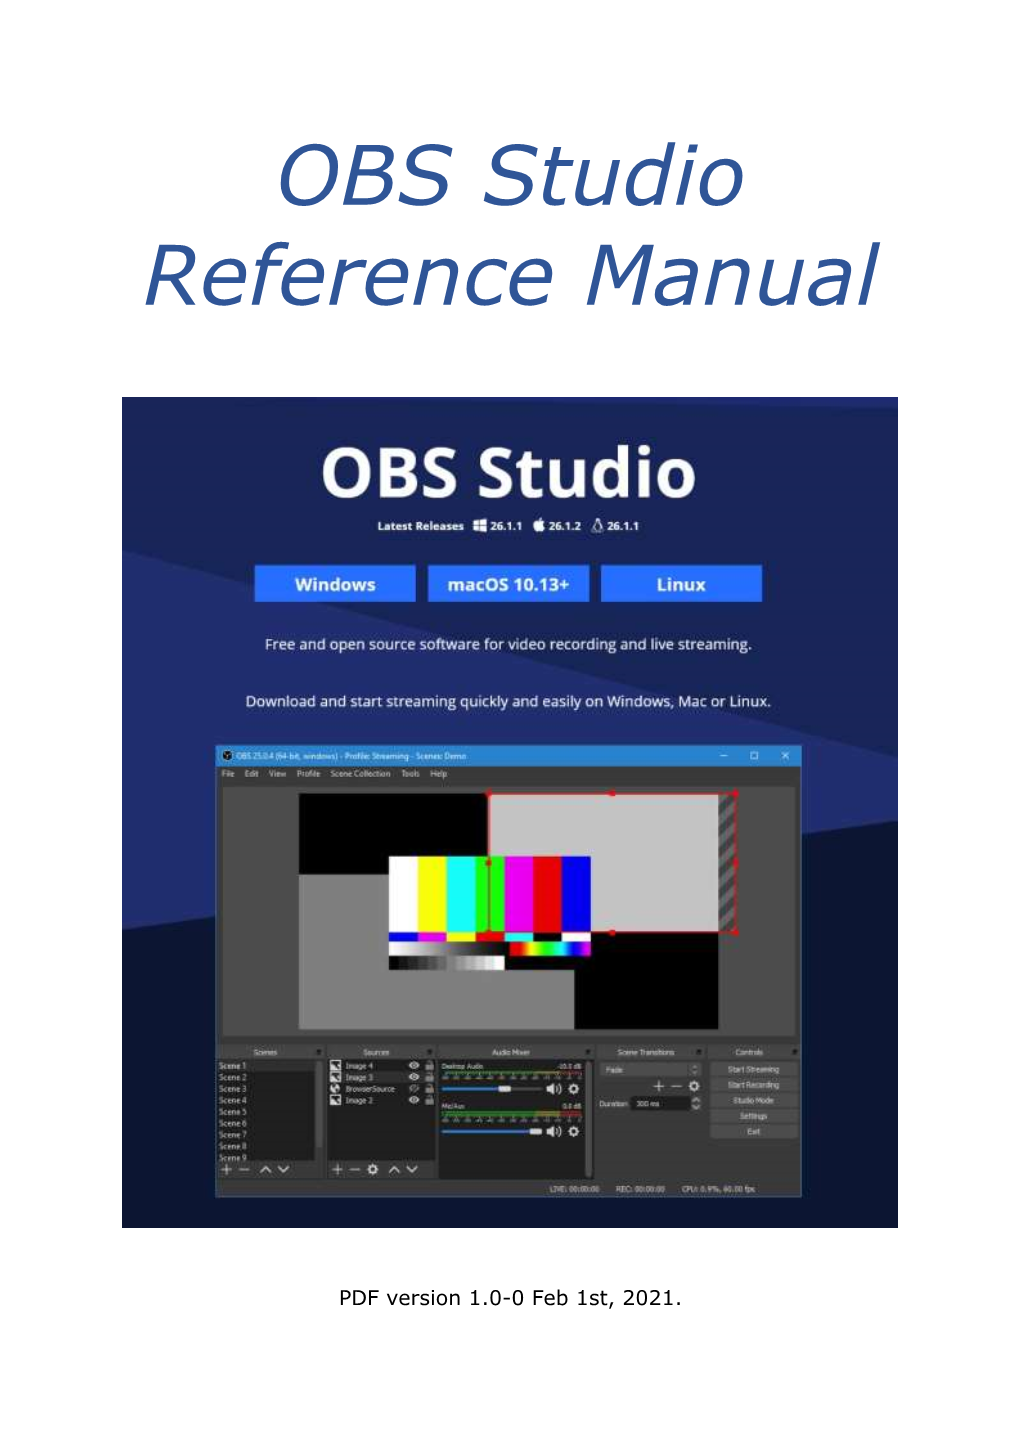 OBS Studio Reference Manual